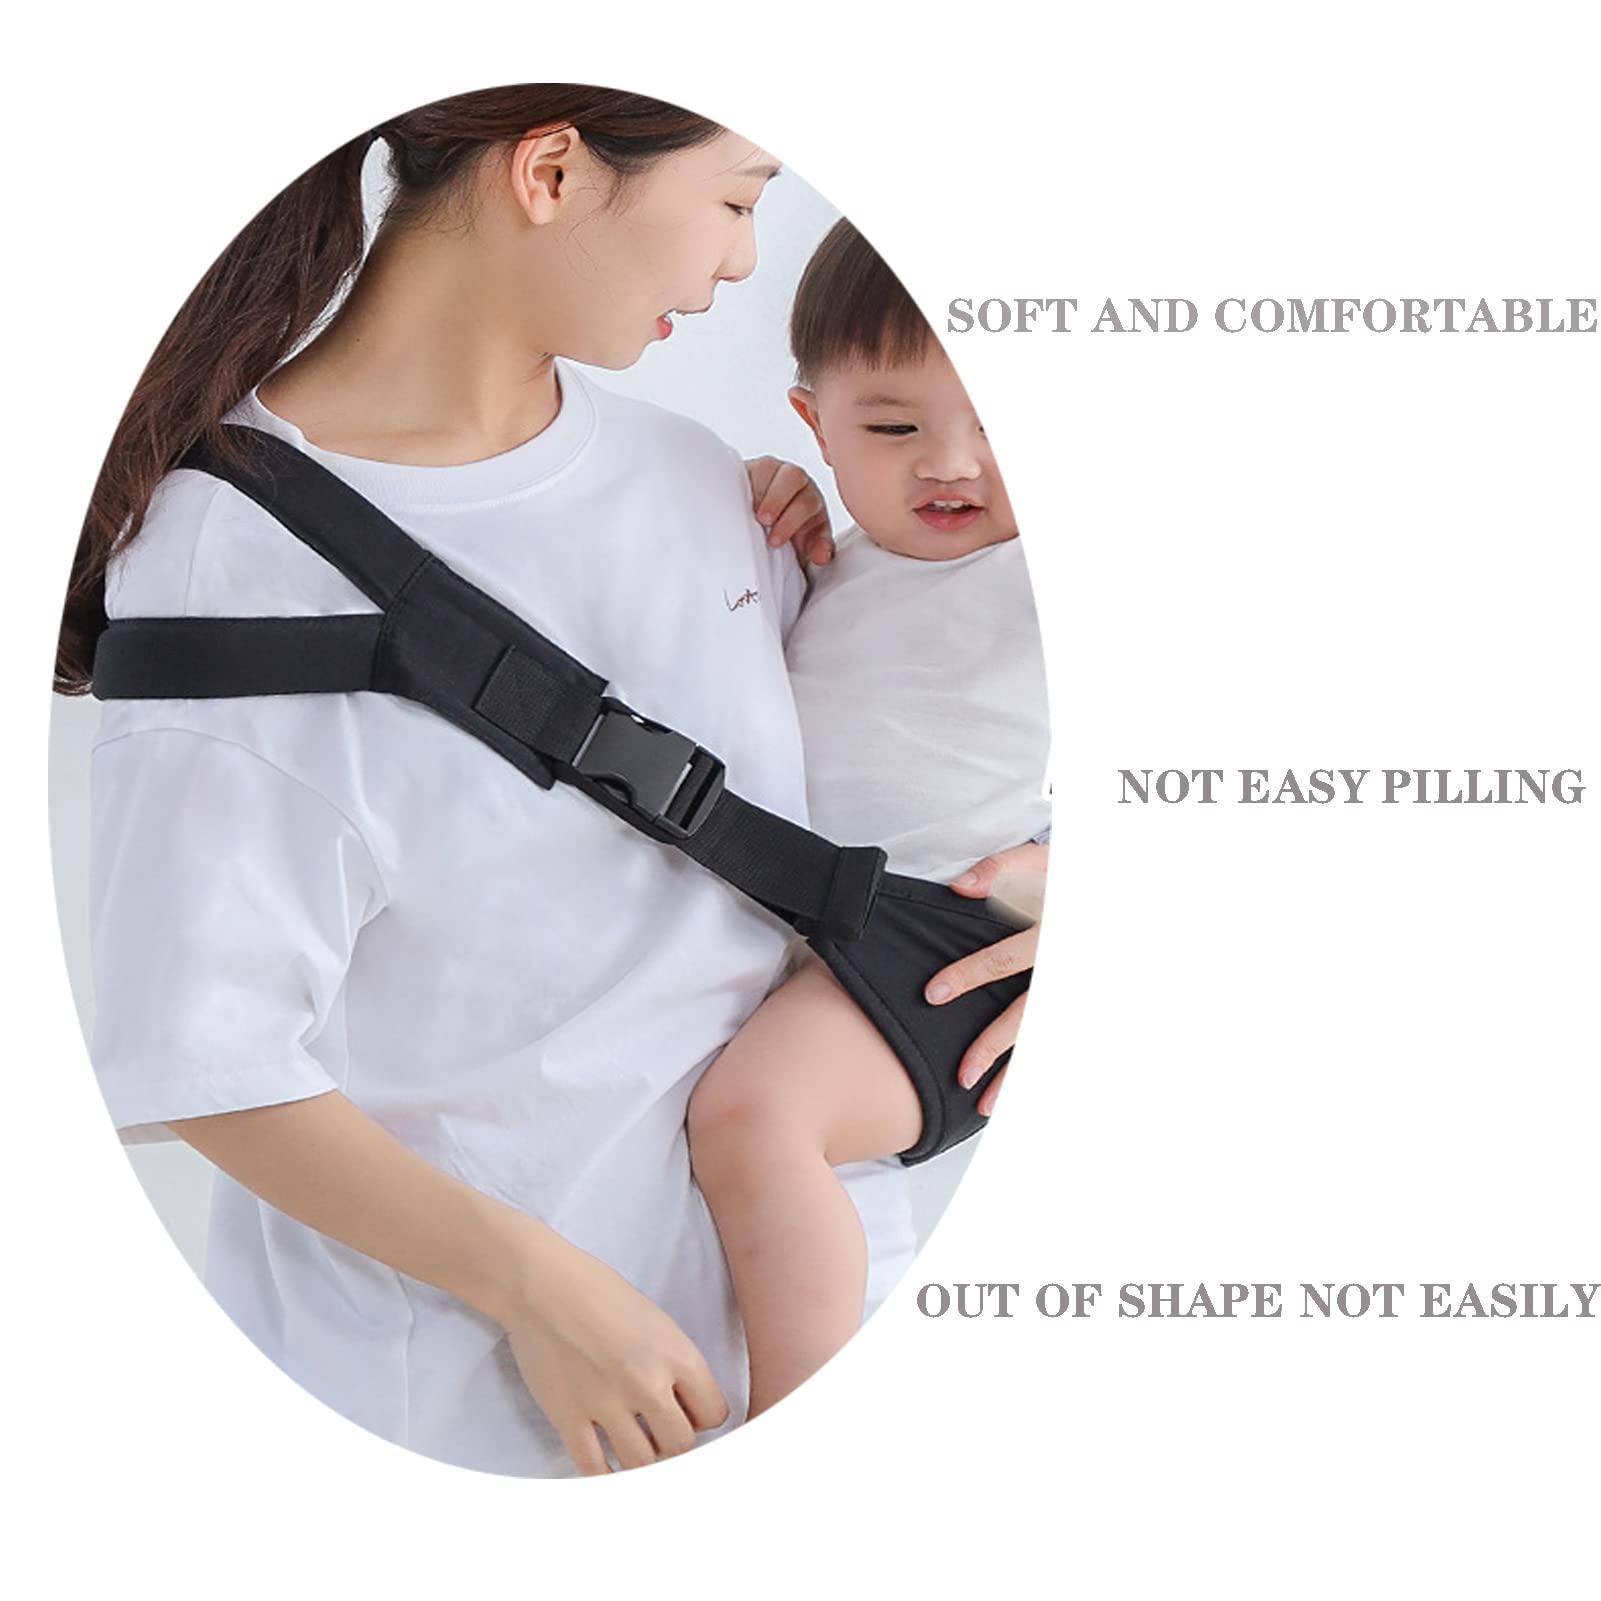 Moormmas Carrier Newborn to Toddler Portable Sling Wraps Strap One Shoulder Labor-Saving Polyester Half Wrapped with Anti-Slip Particles Soft Straps for, Infant &, Black 2, 1.0 Count